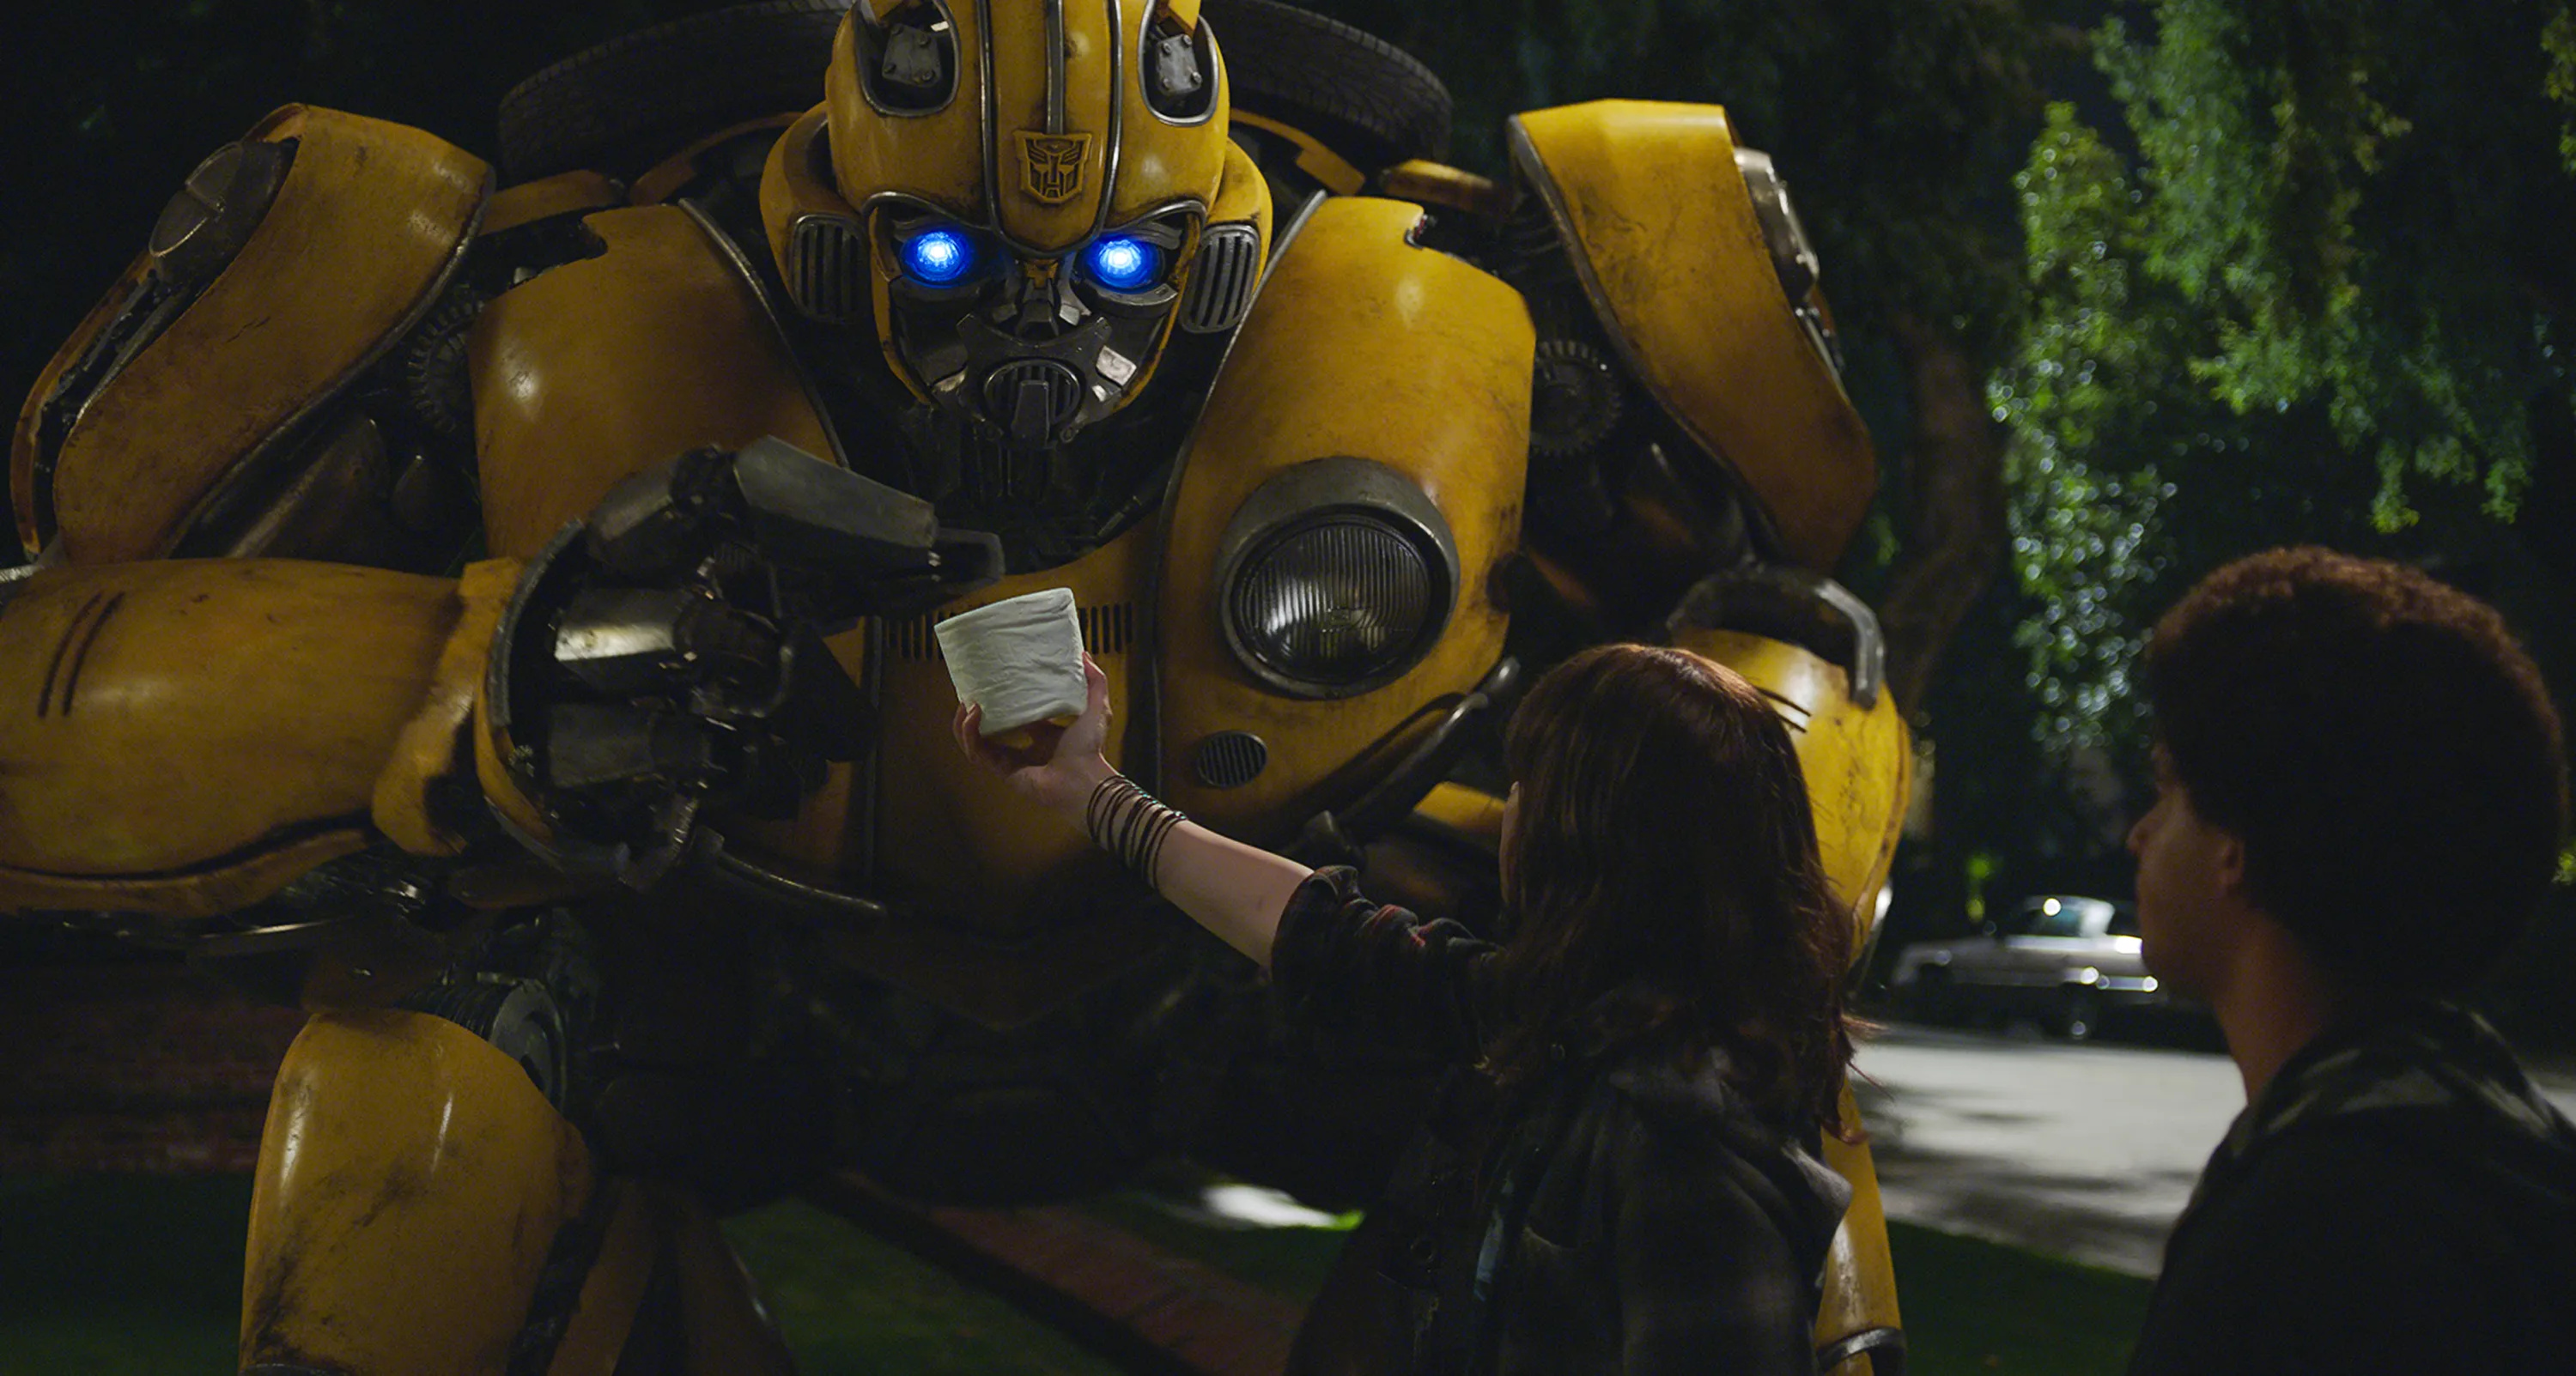 Bumblebee questions, 1980s spinoff, Transformers, Burning, 3000x1610 HD Desktop